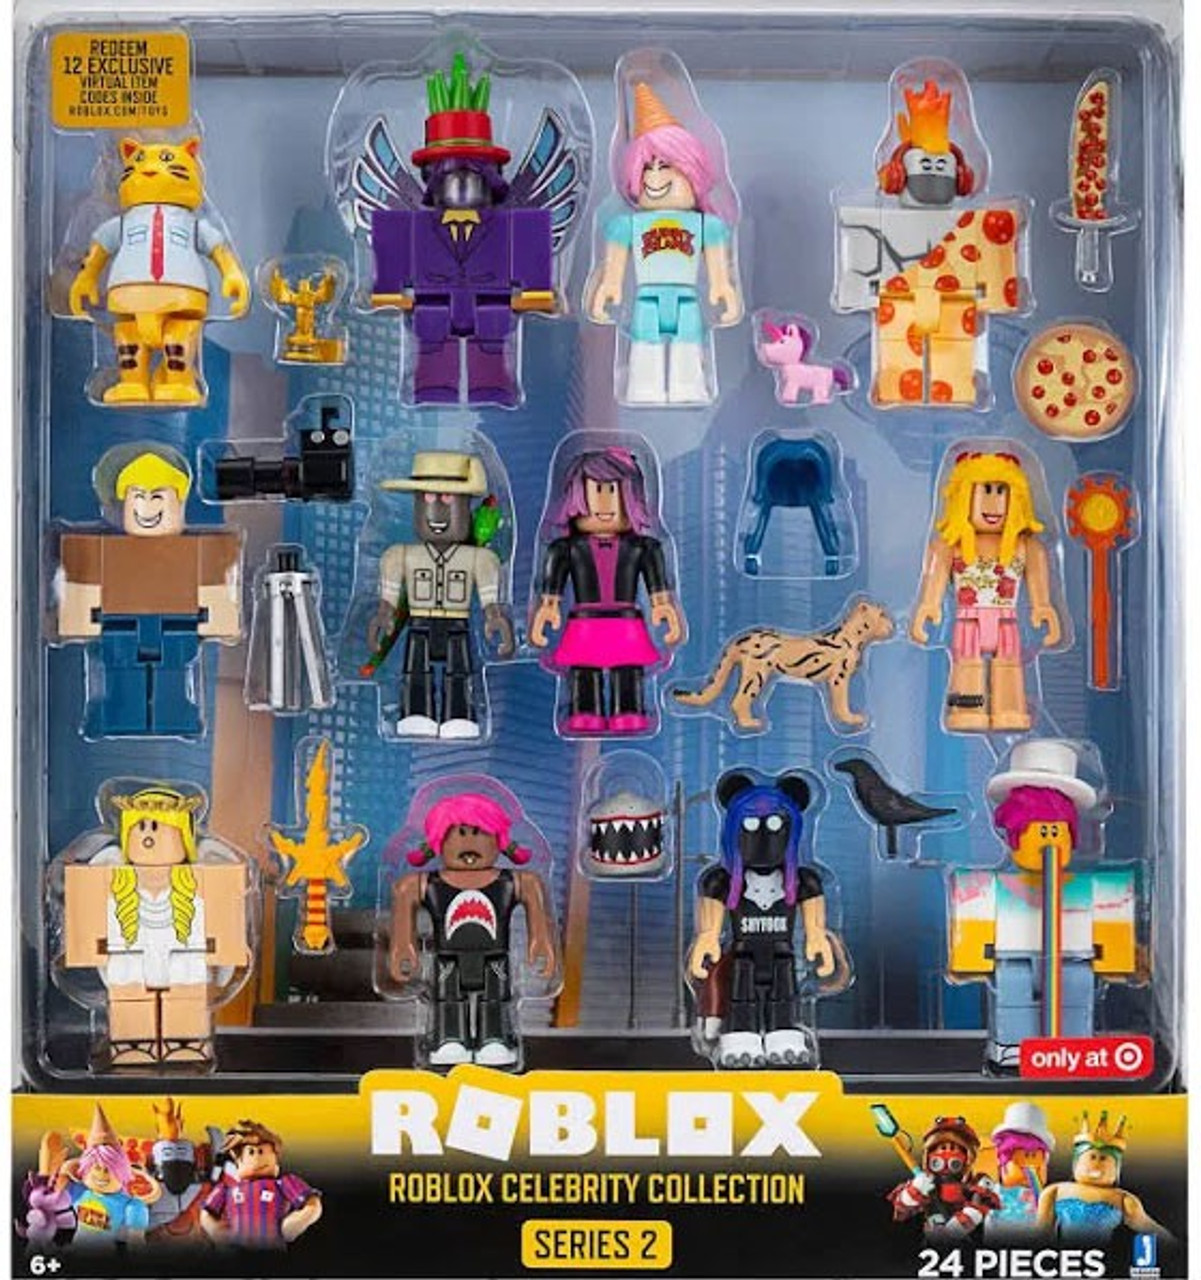 Roblox Series 2 Celebrity Collection Exclusive Action Figure 12 Pack Damaged Package - lullaby roblox id codes